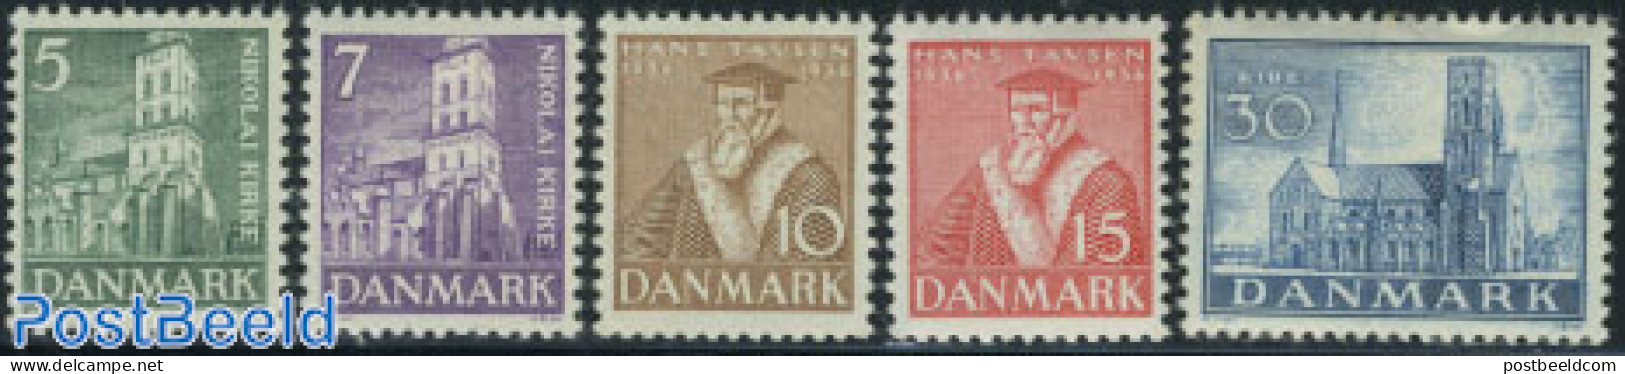 Denmark 1936 400 Years Reformation 5v, Unused (hinged), Religion - Churches, Temples, Mosques, Synagogues - Religion - Neufs